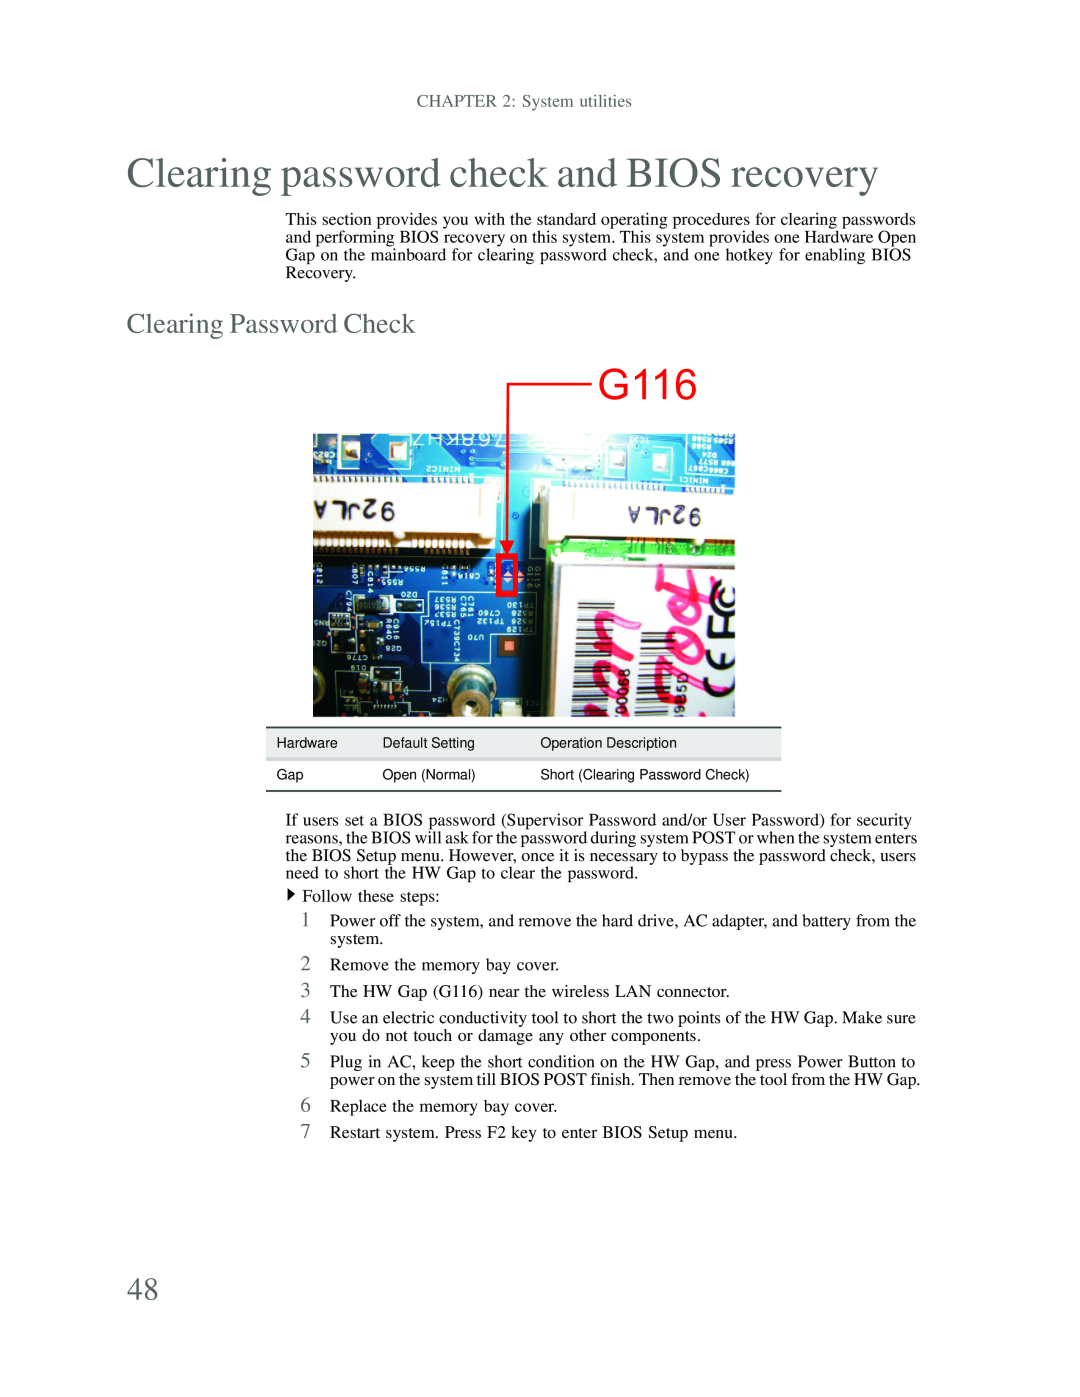 Gateway p-79 manual Clearing password check and BIOS recovery, Clearing Password Check, G116, System utilities 